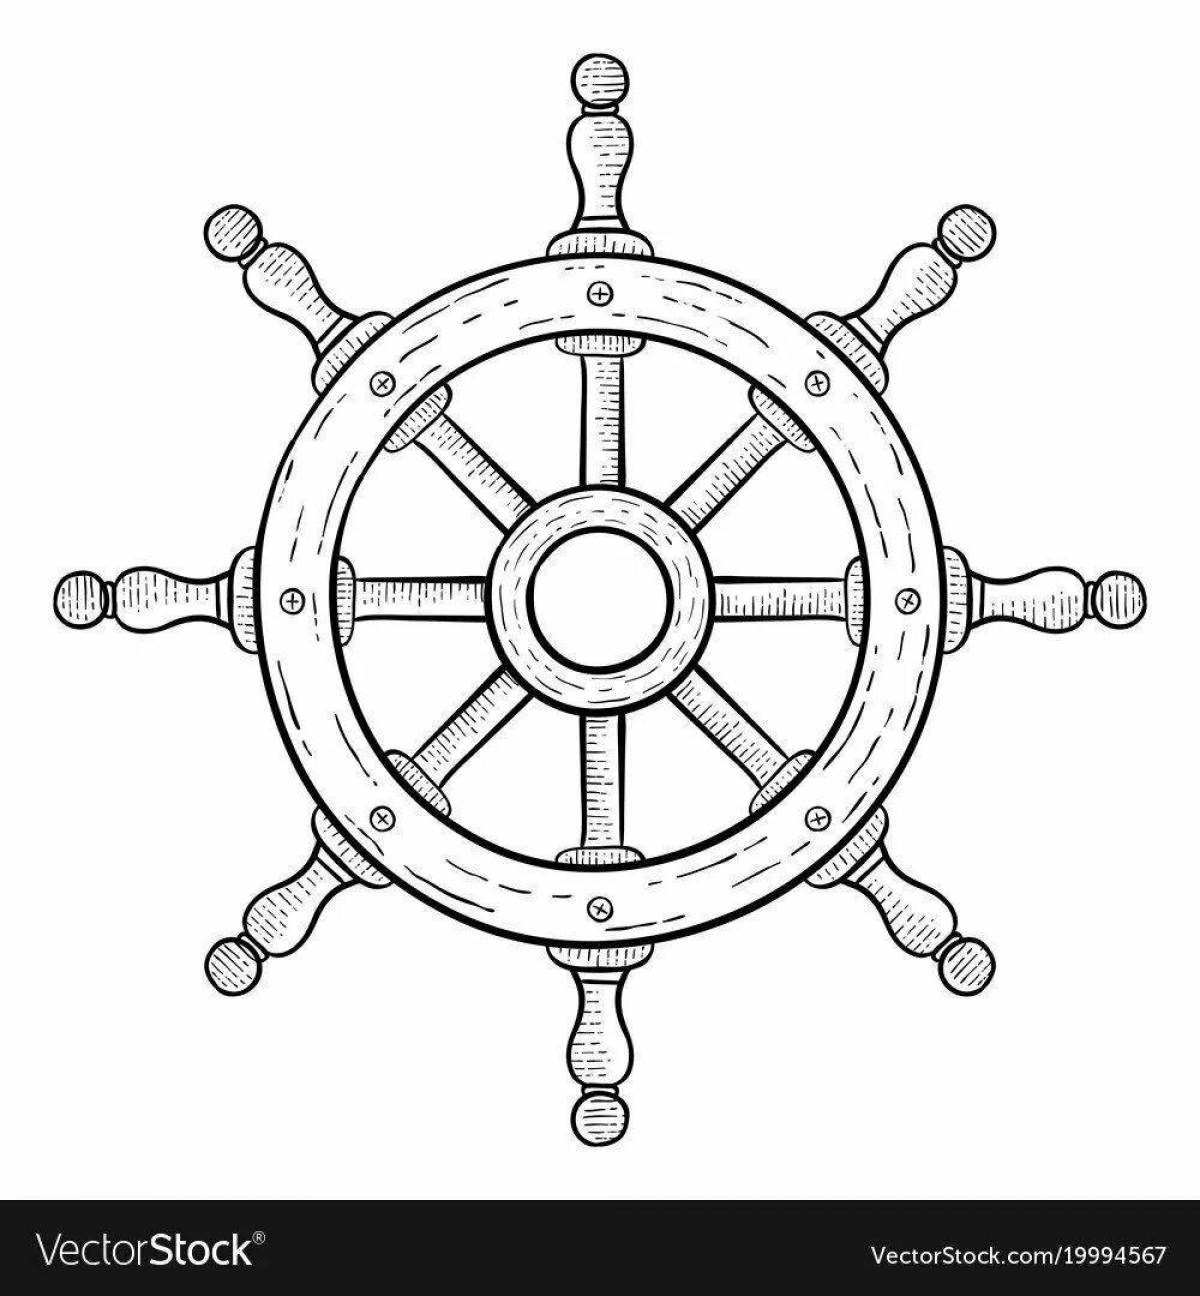 Rudder coloring page